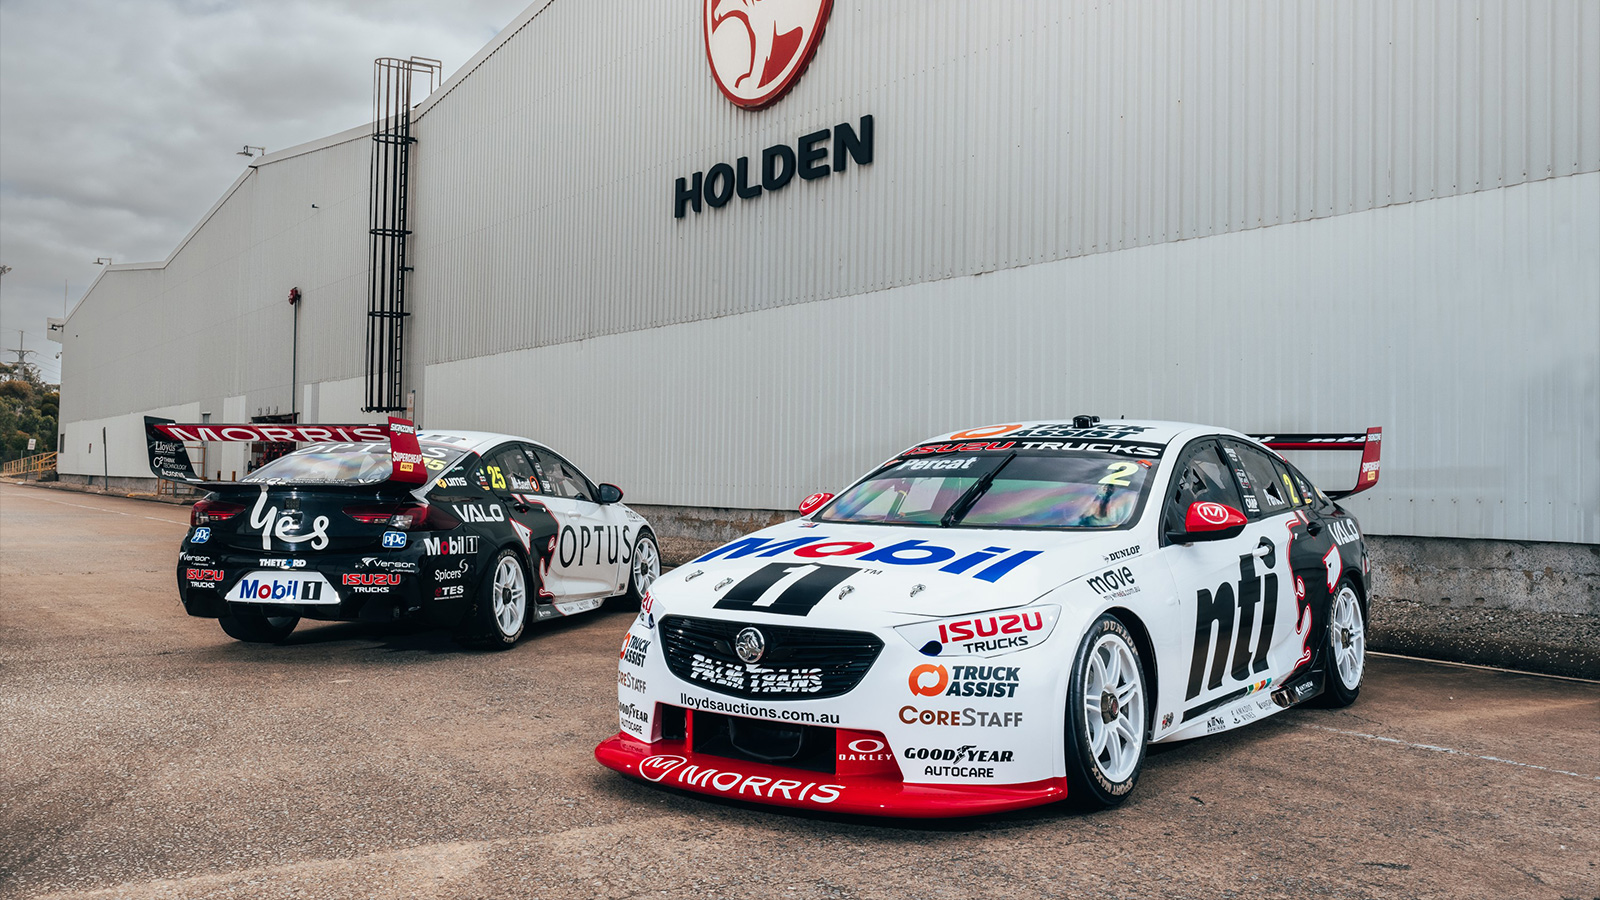 This weekend marks Holden’s last in Supercars.